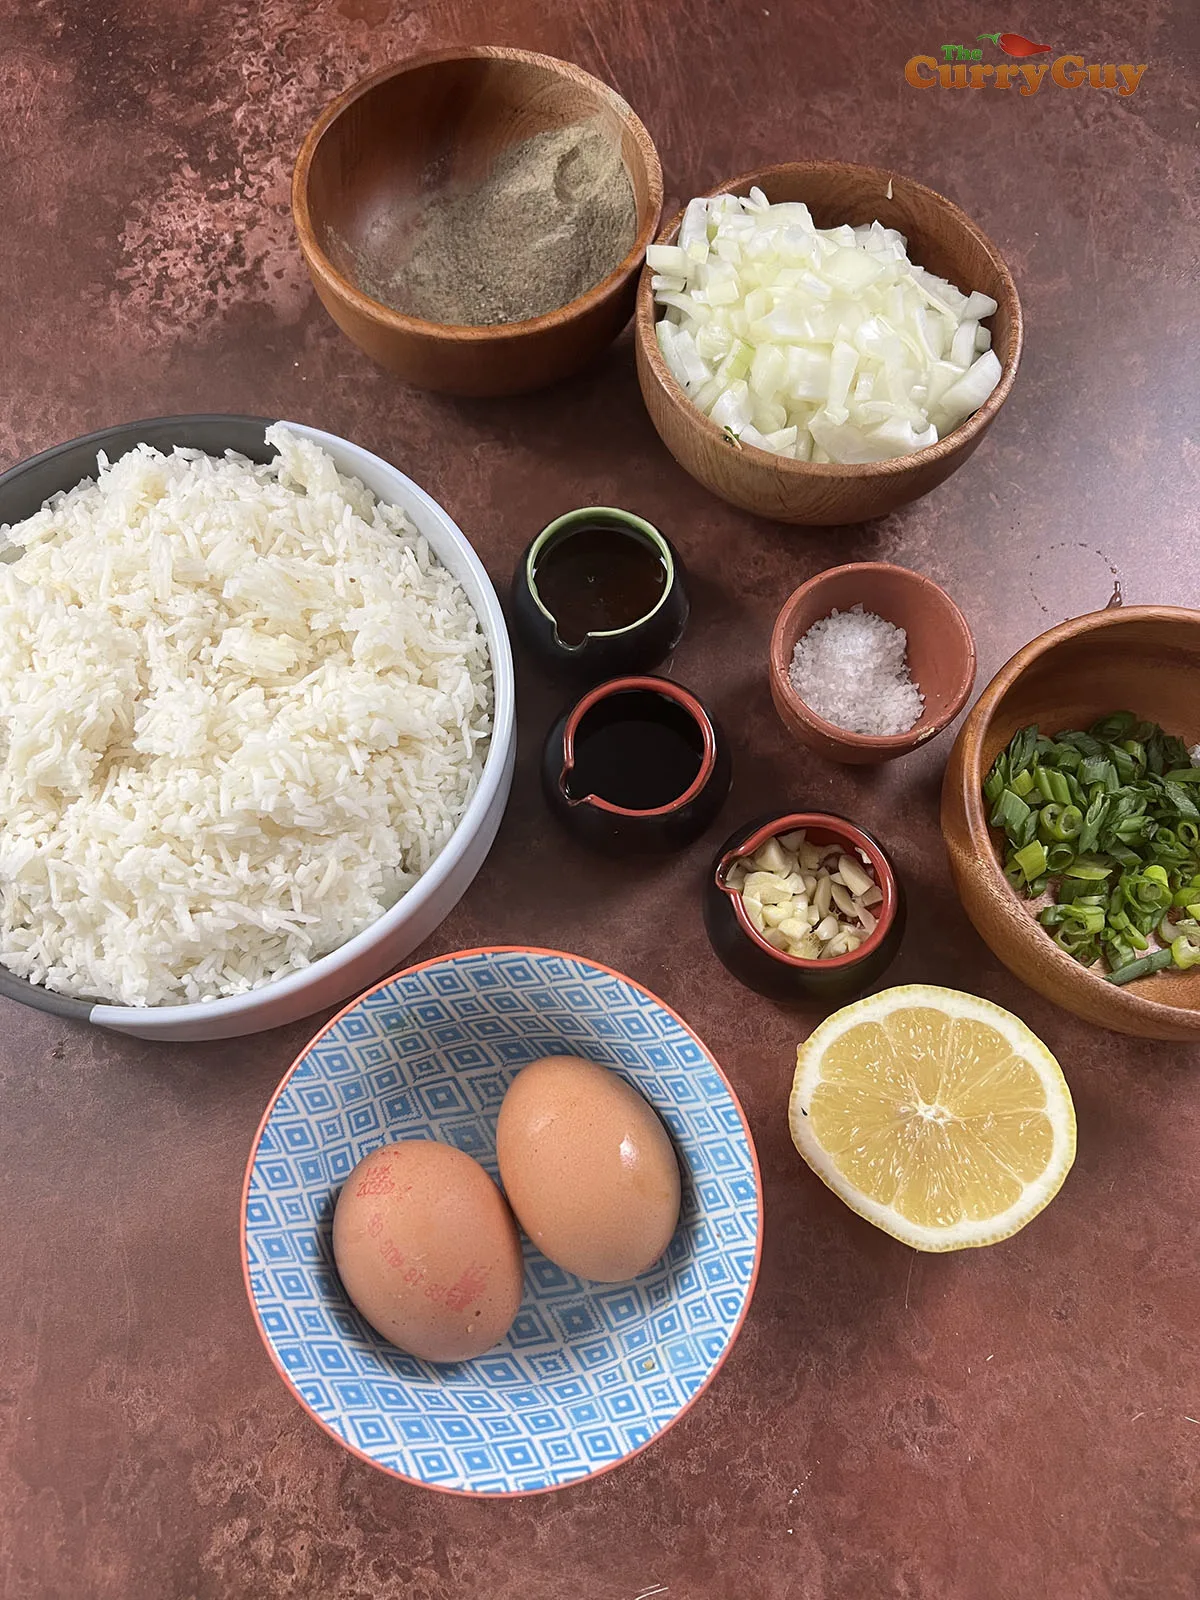 Ingredients for egg fried rice